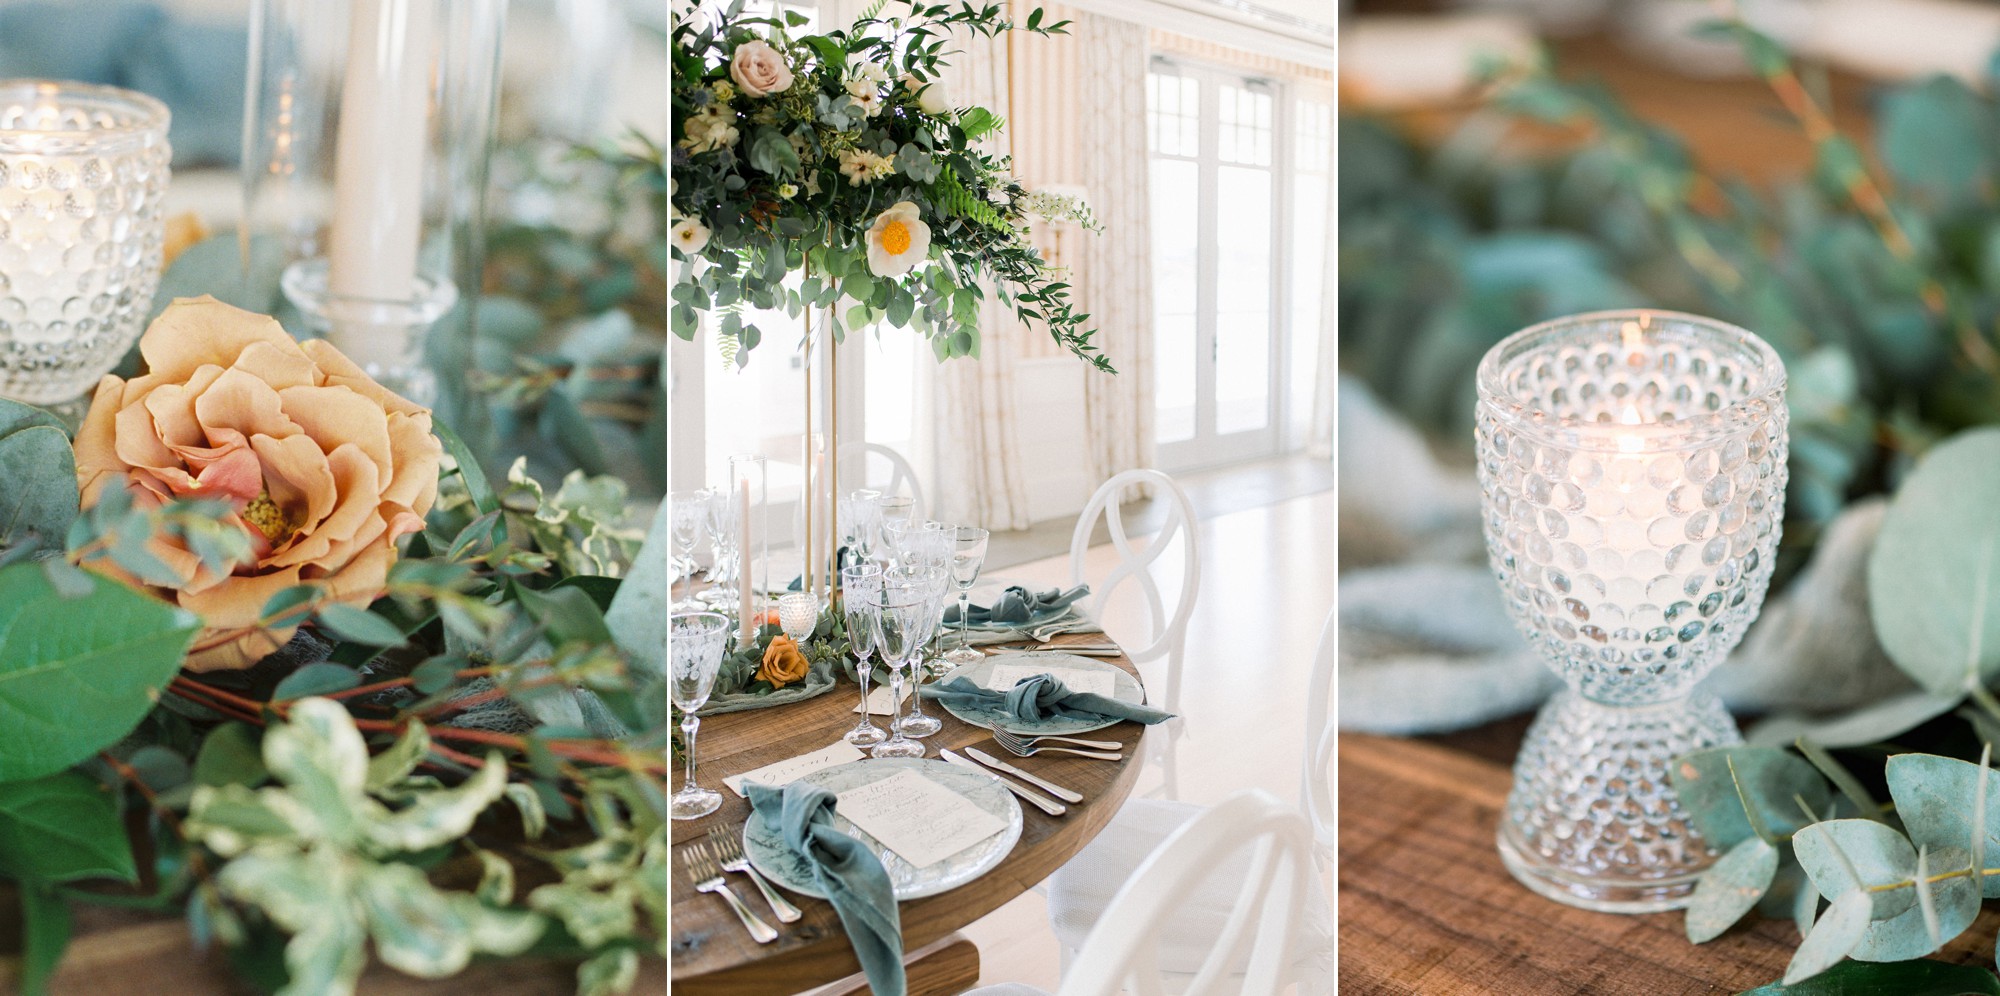 Gloucester MA Beauport Hotel Wedding | Tuscan meets modern | Party Rental LTD glass marble charger, glassware, and cloth napkins | hand lettered calligraphy wedding menus | modern reception flowers by Lilac & Lily